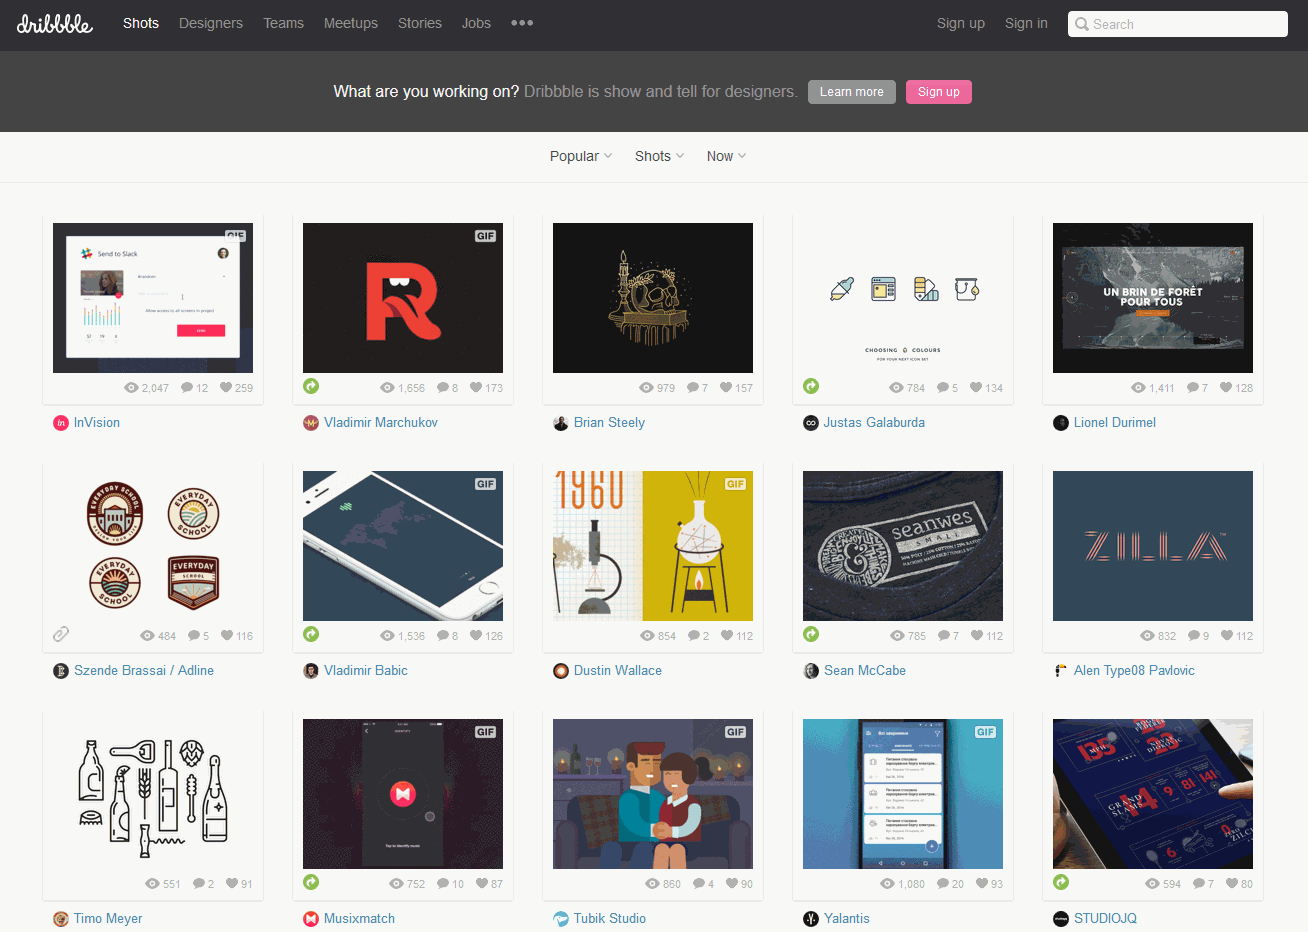 Dribbble's interface, with the grid system being highlighted